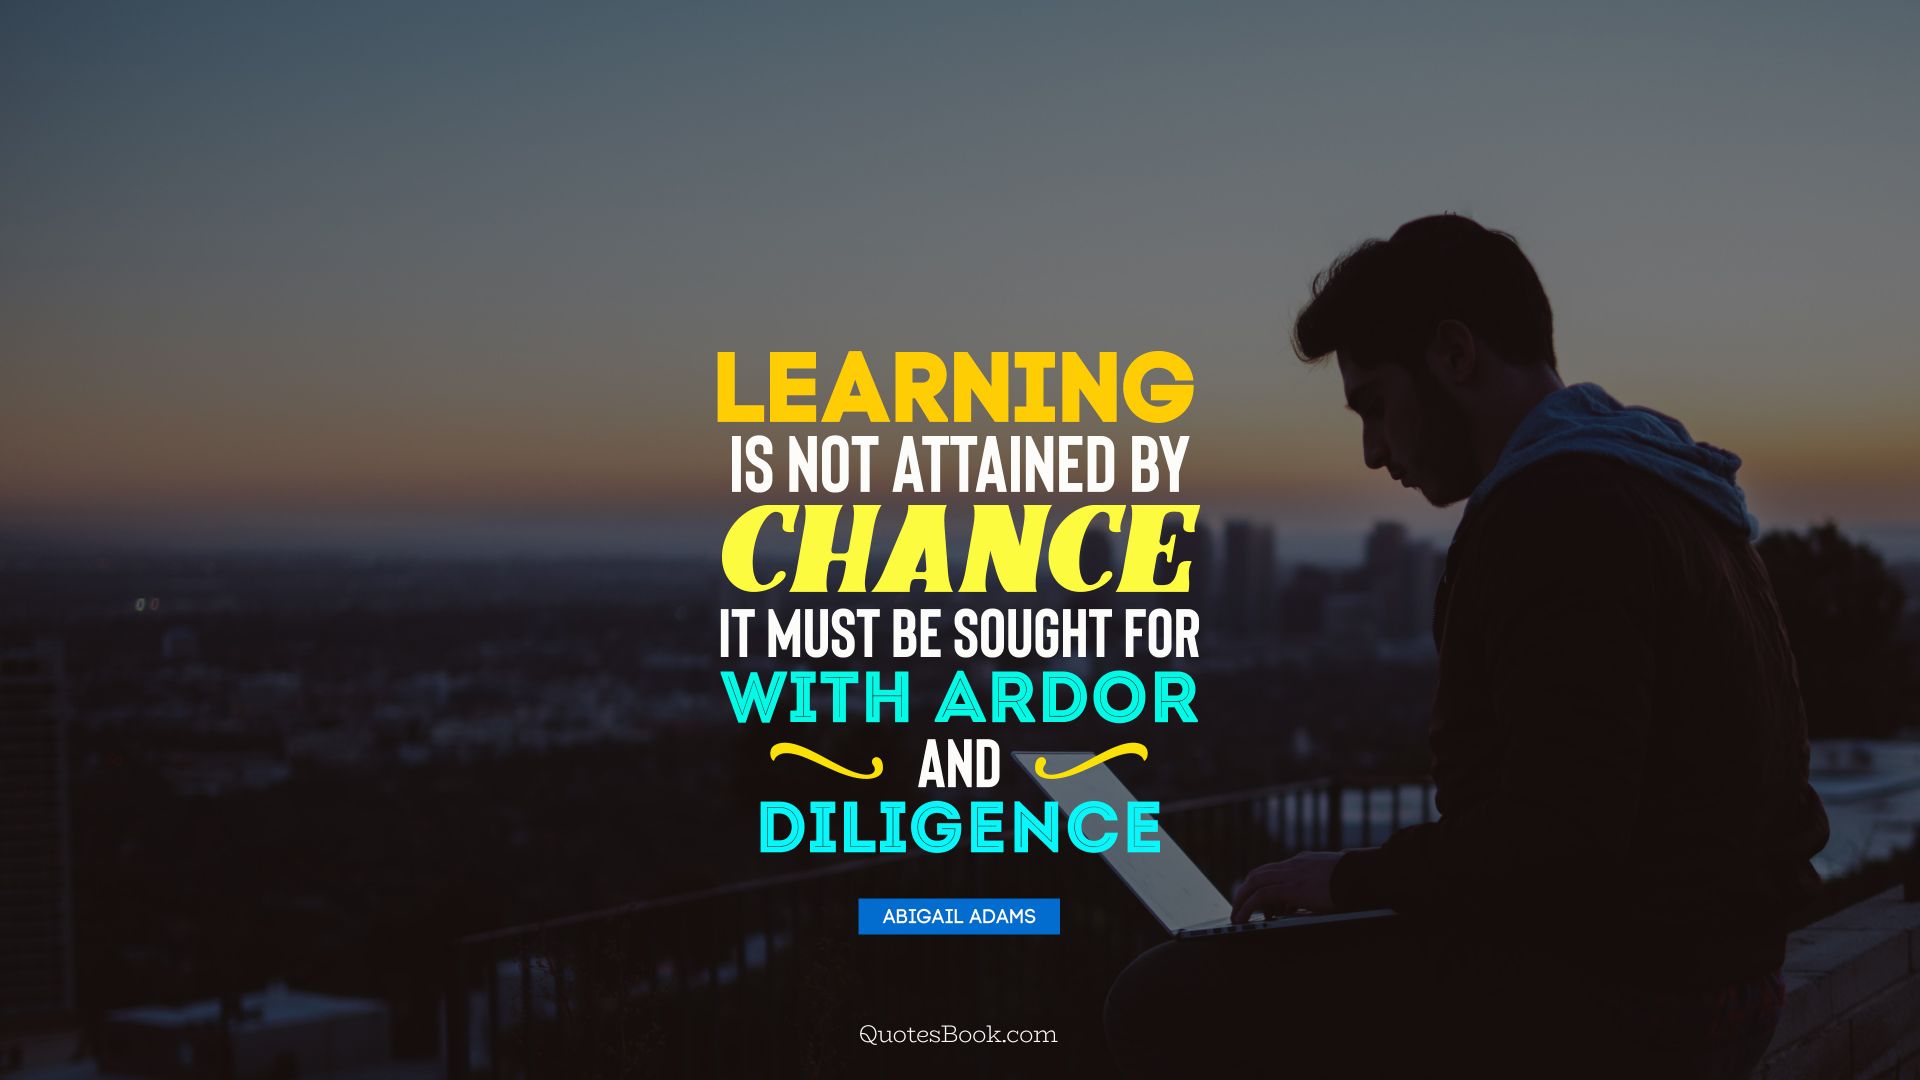 Learning is not attained by chance it must be sought for with ardor and diligence. - Quote by Abigail Adams